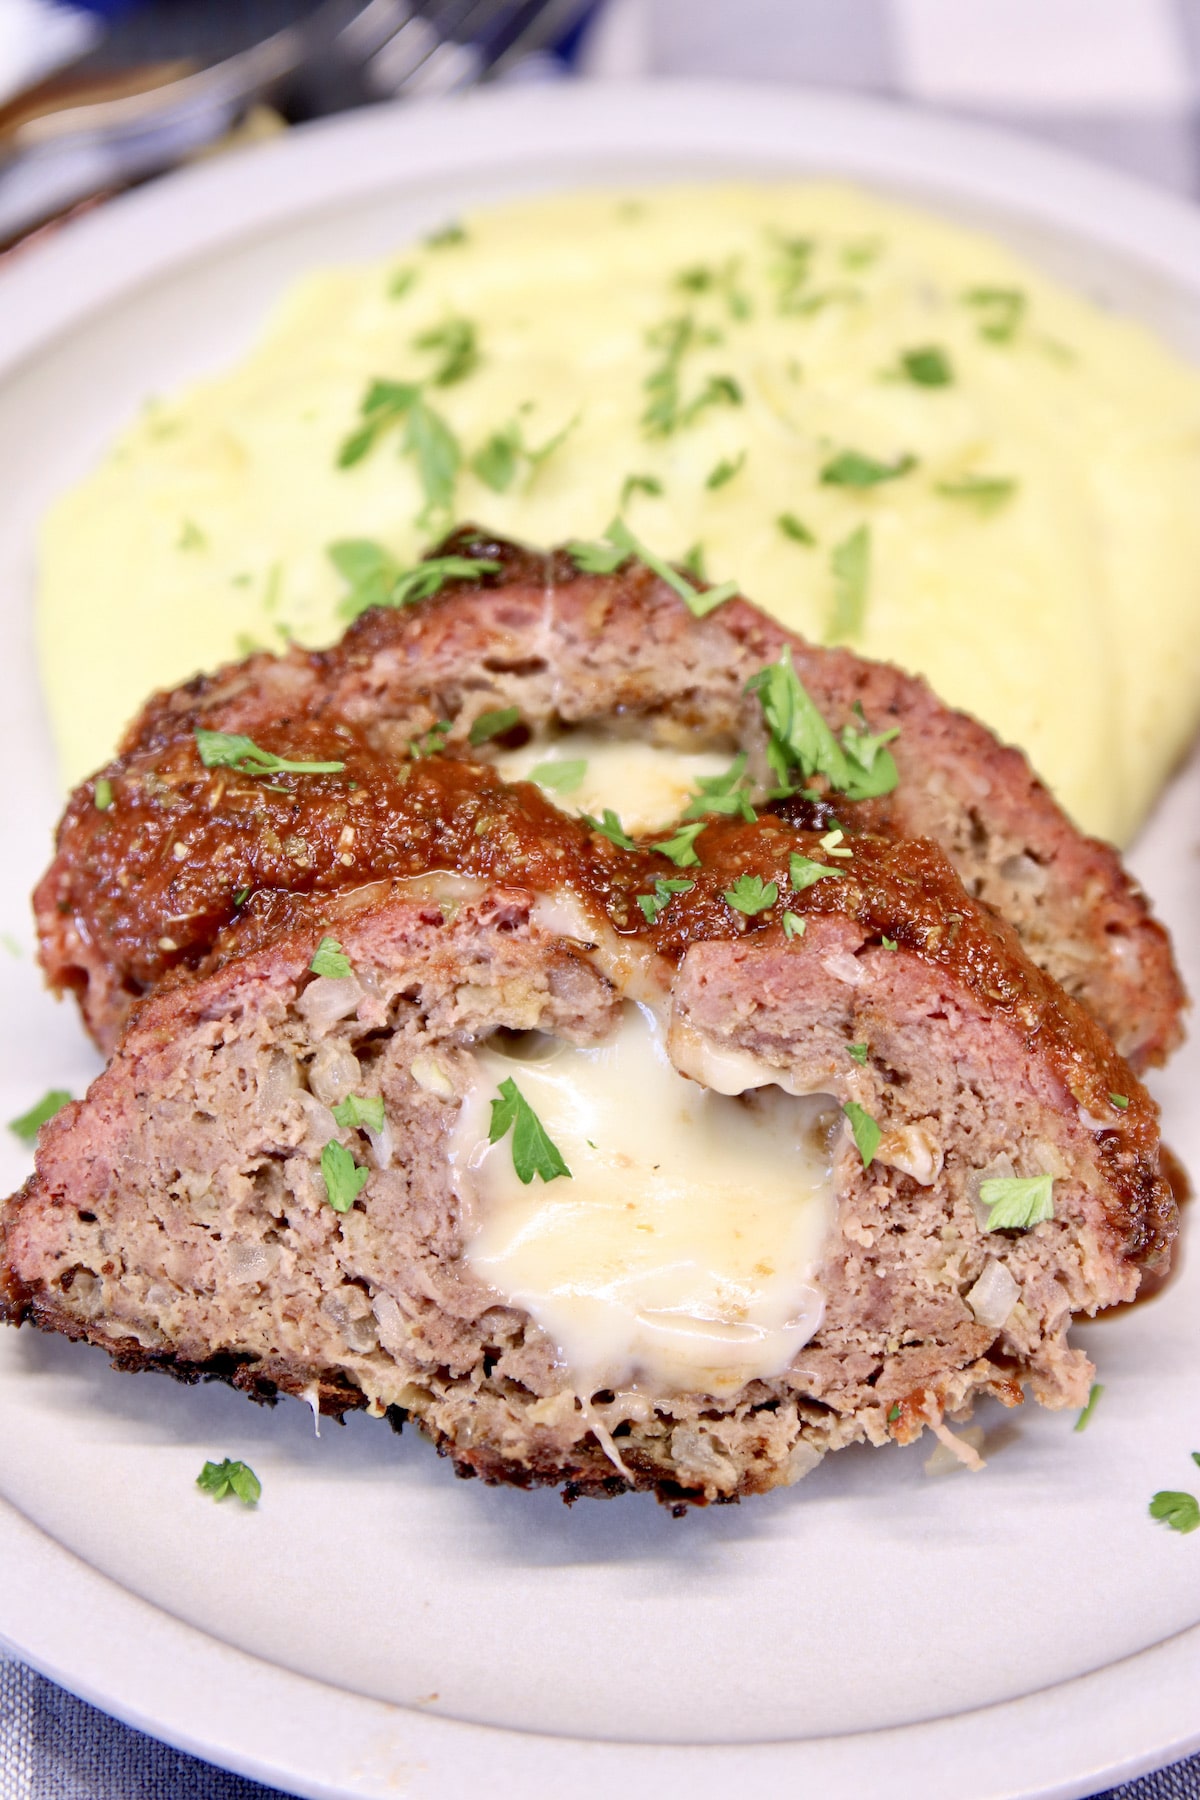 Mozzarella stuffed meatloaf slices with mashed potatoes.